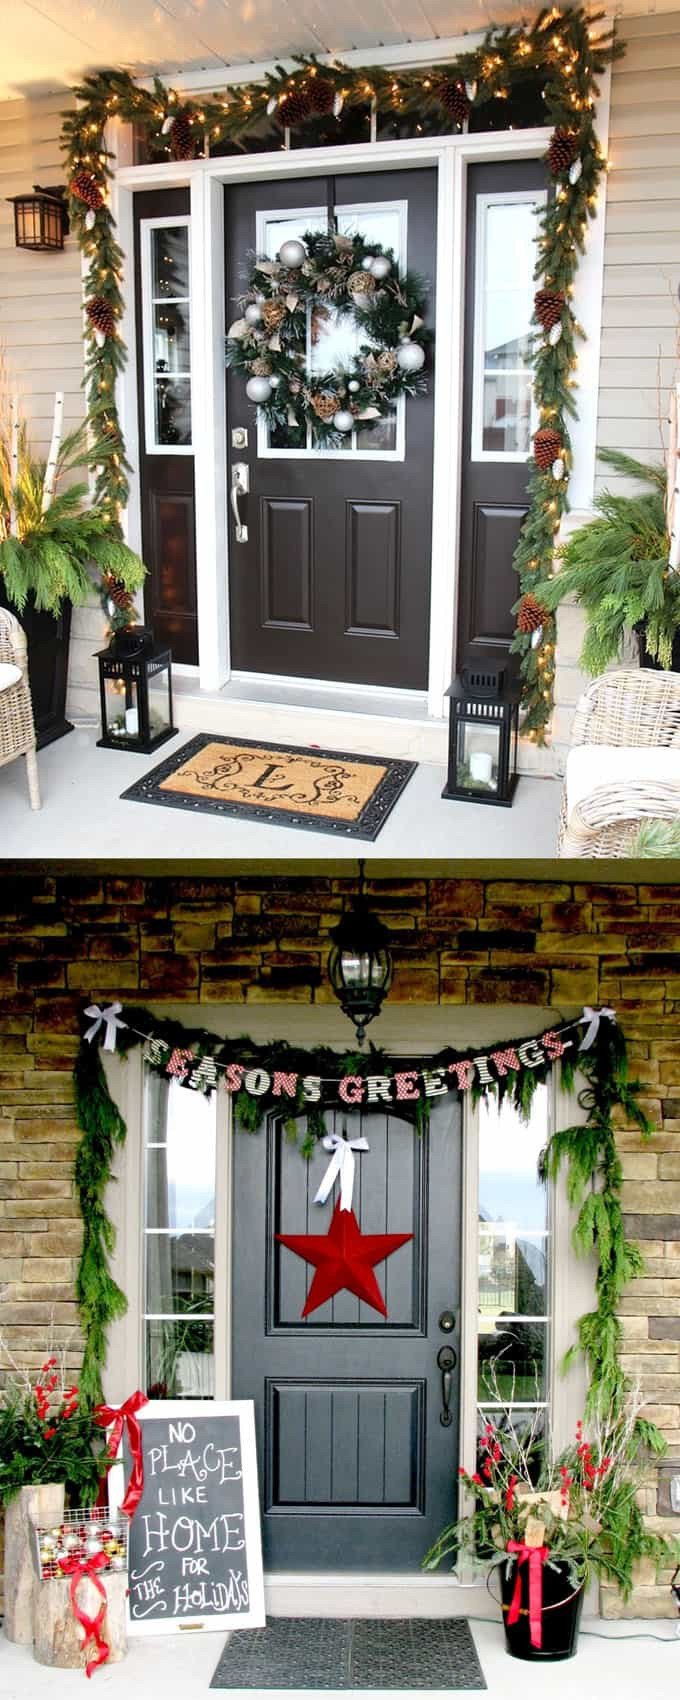 DIY Christmas Decorations For Outside
 Gorgeous Outdoor Christmas Decorations 32 Best Ideas